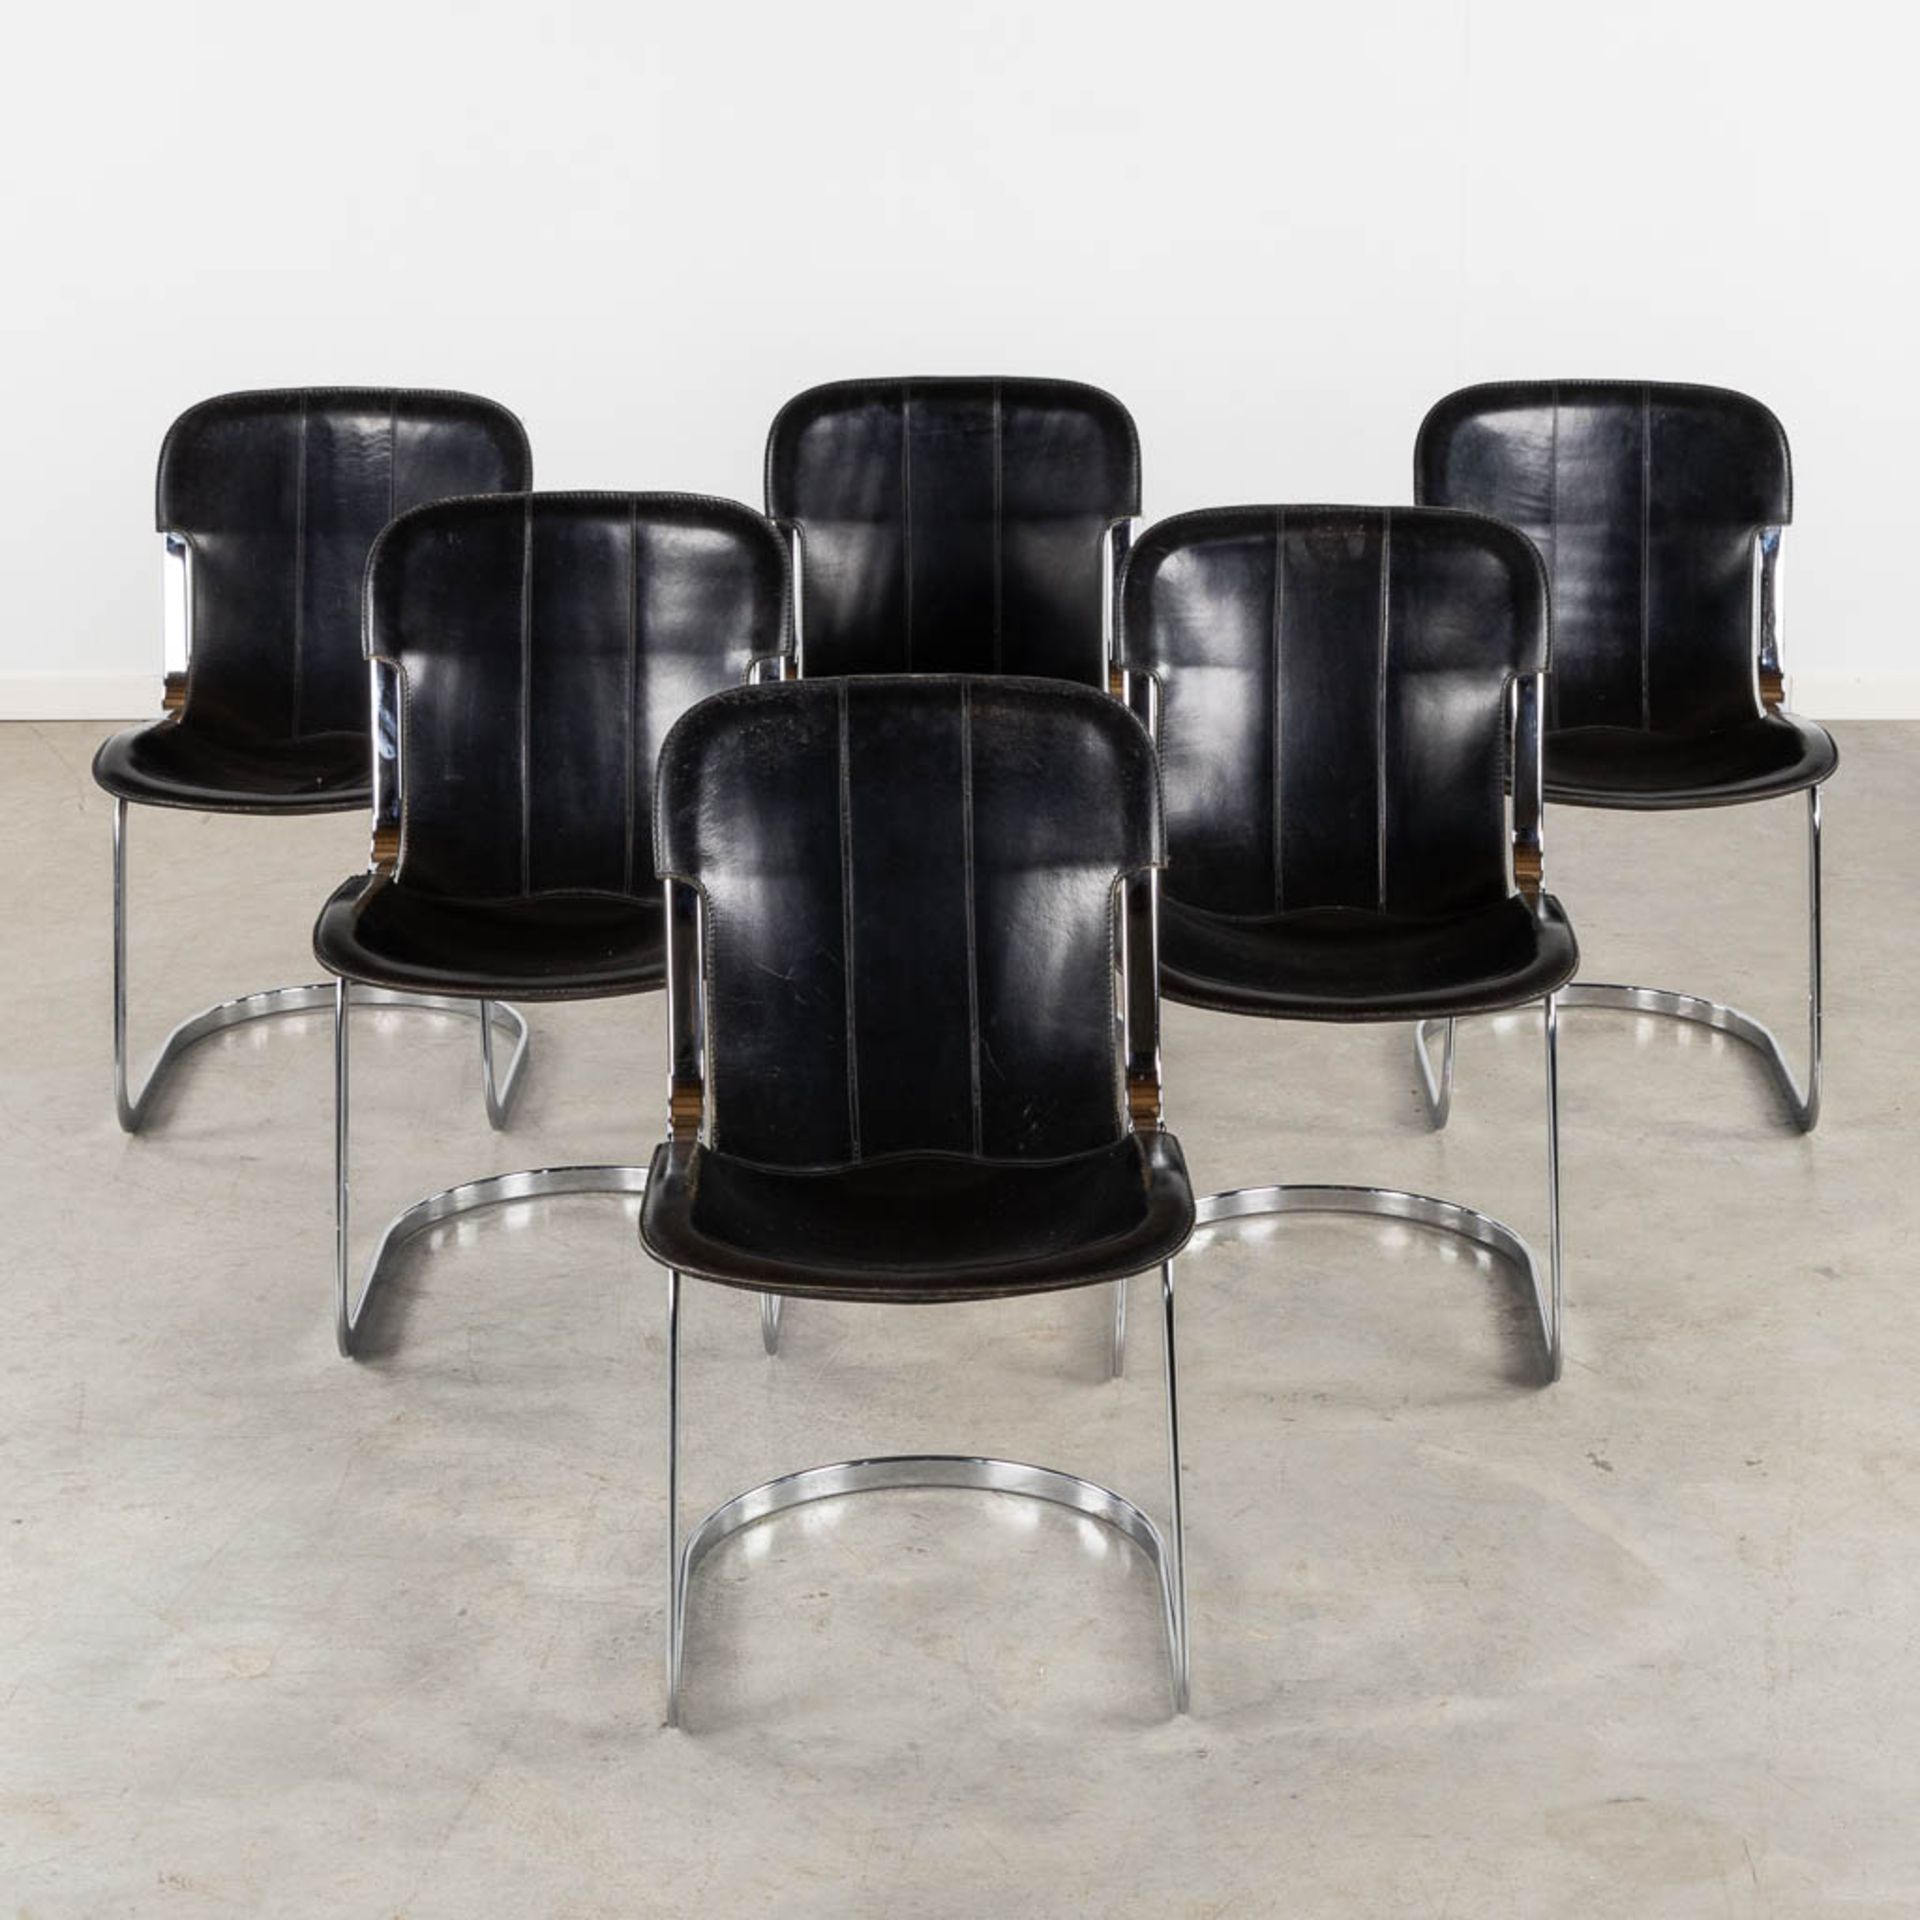 Willy RIZZO (1928-2013) 'Six Chairs' chromed metal and leather. (L:60 x W:45 x H:79 cm)